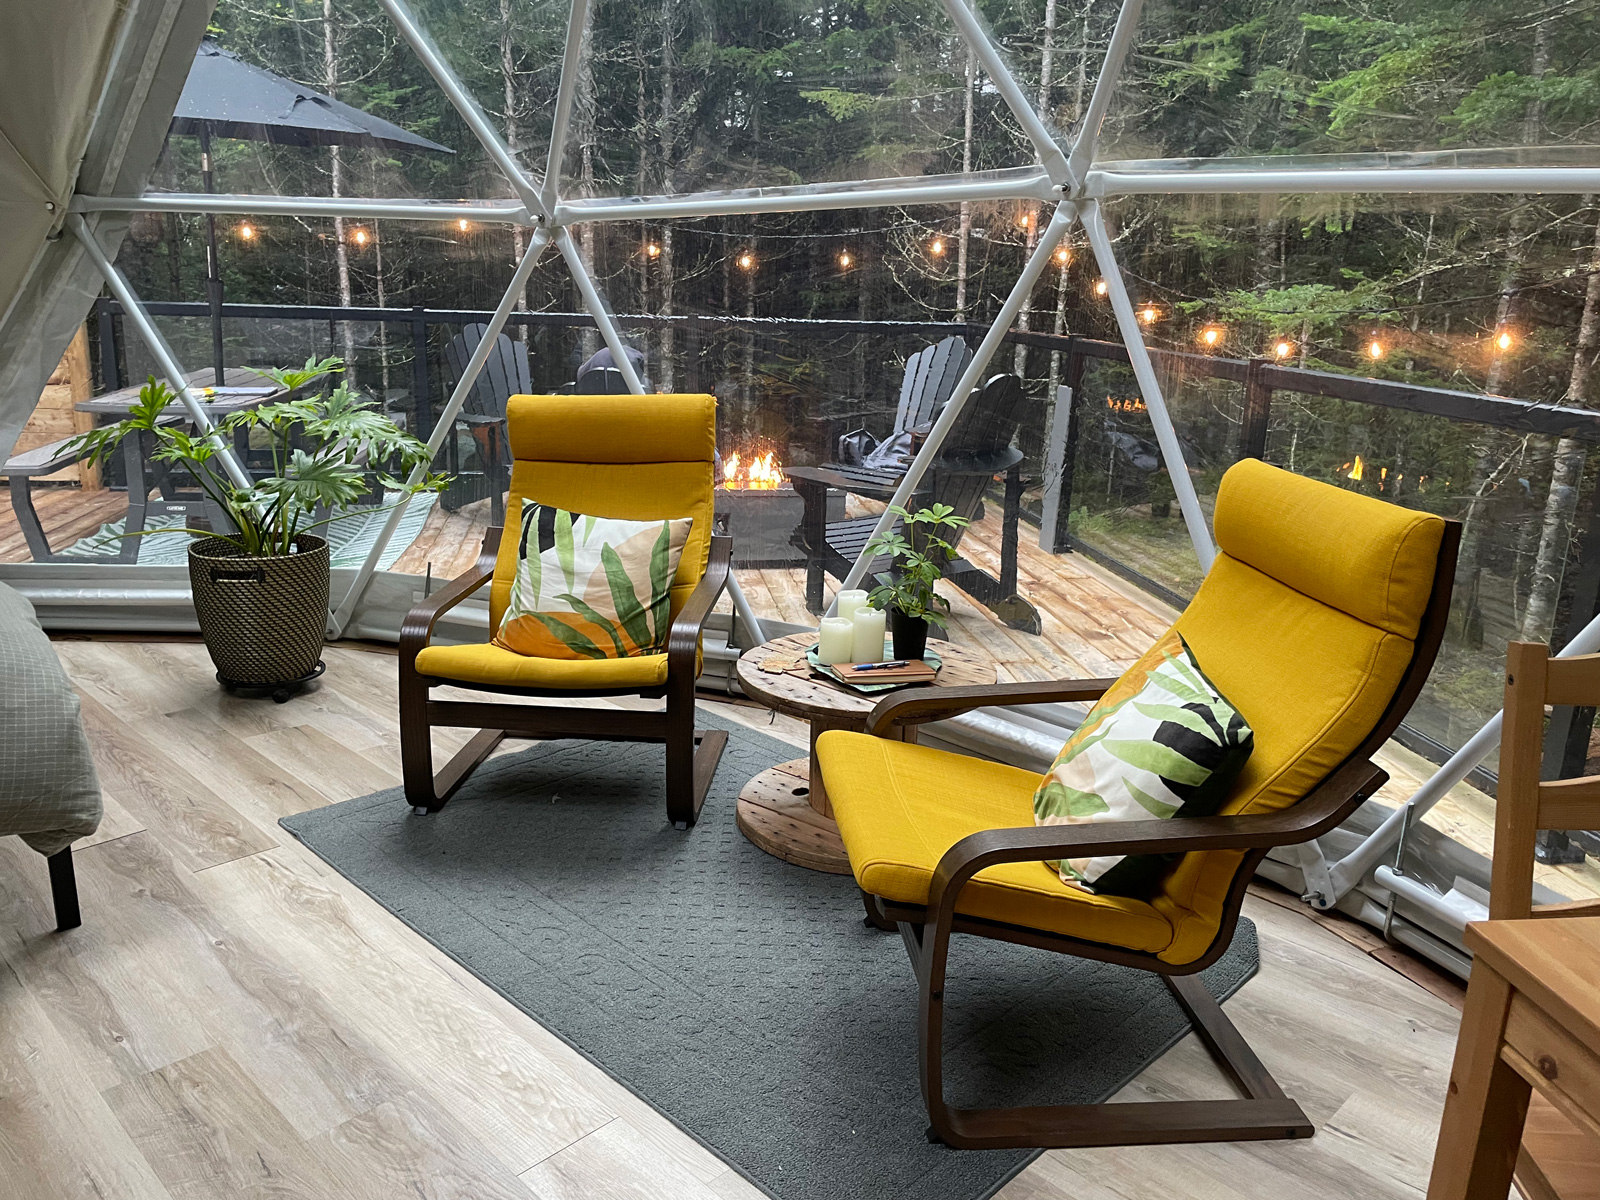 Mossy Log Dome Indoor and Outdoor Sitting Areas